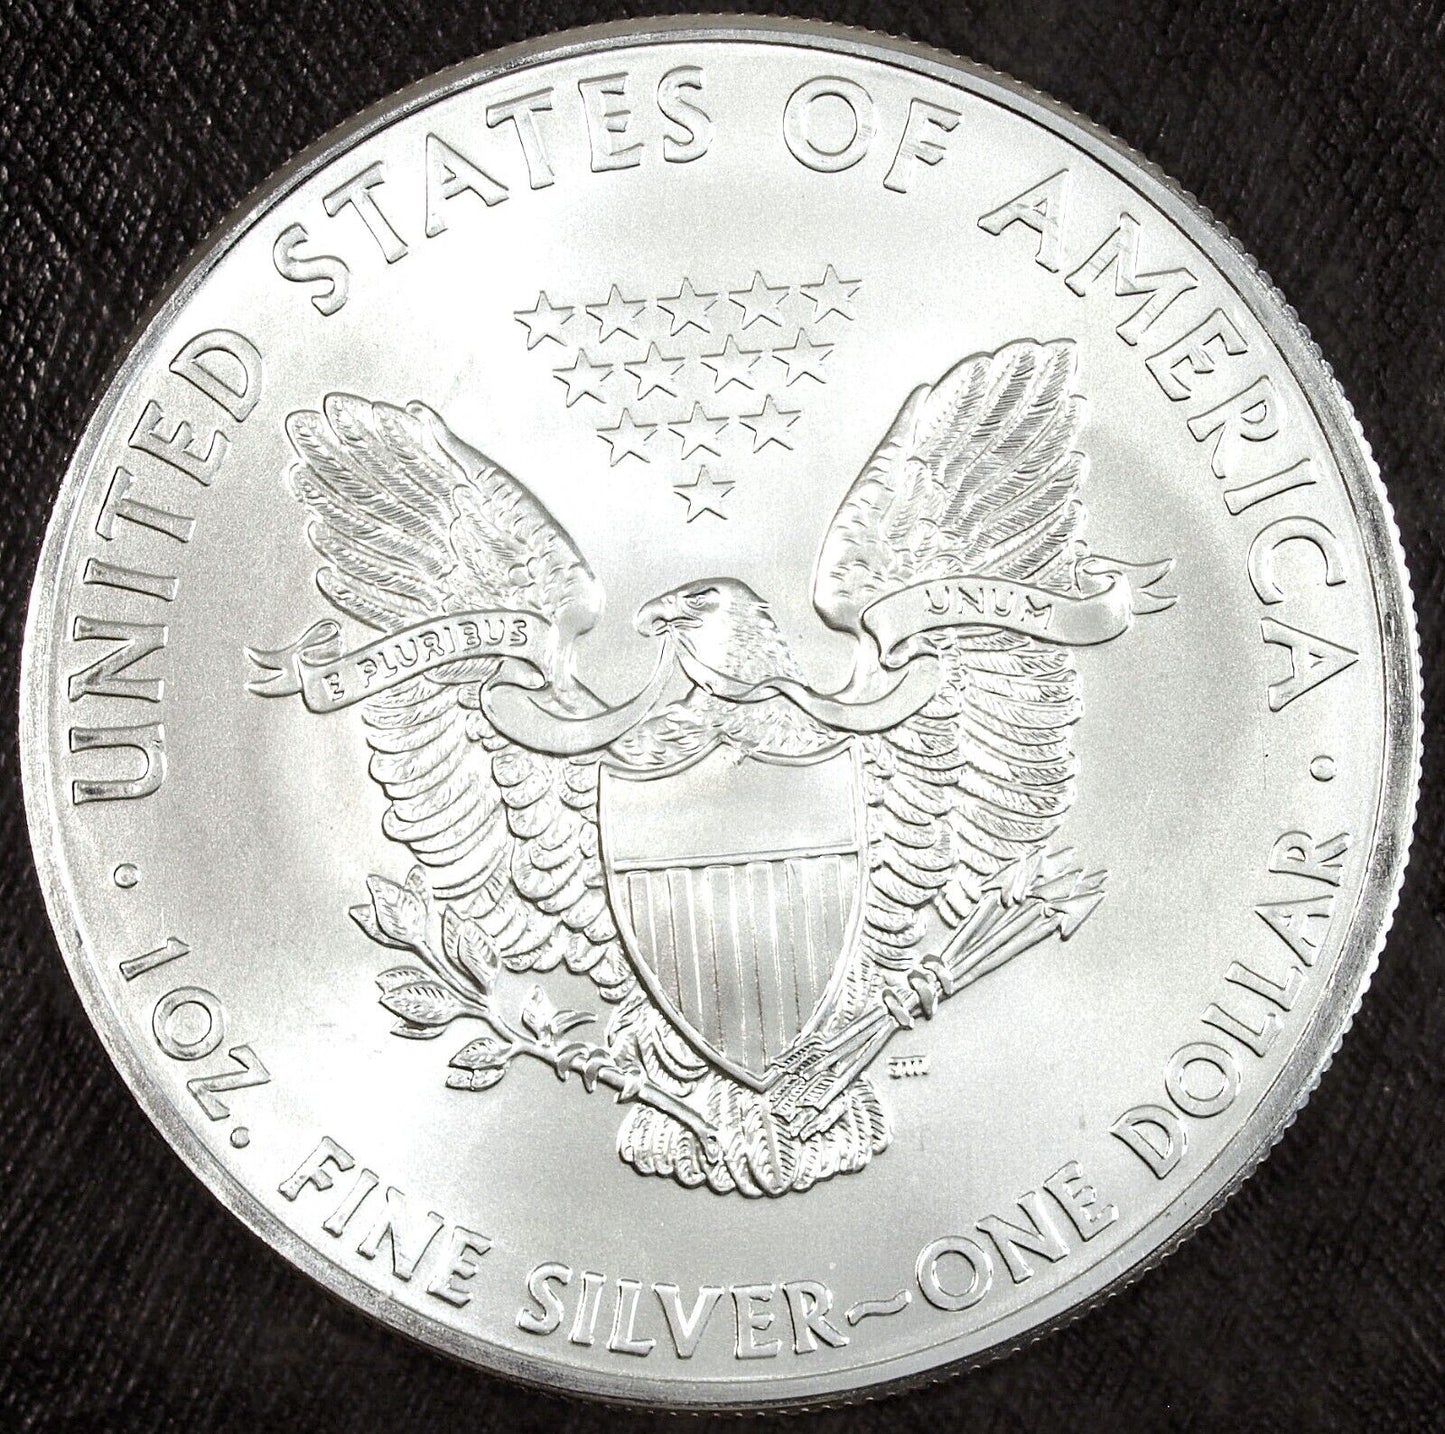 2012 American Silver Eagle ☆☆ Uncirculated ☆☆ Great Collectible 258